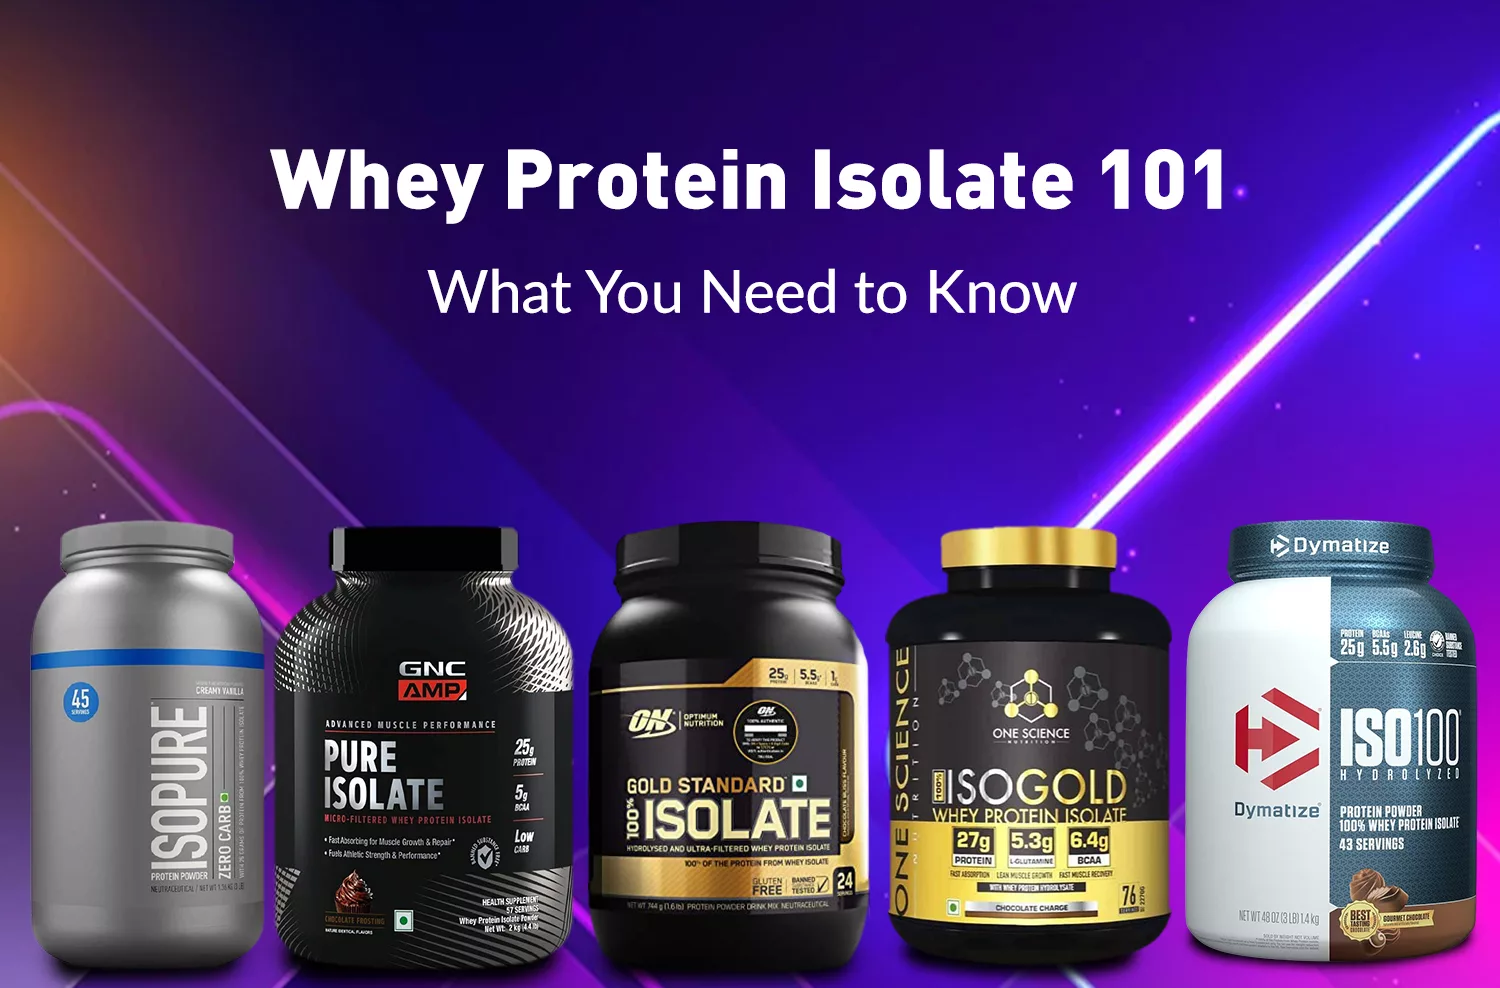 Whey Protein Isolate 101 - What You Need to Know